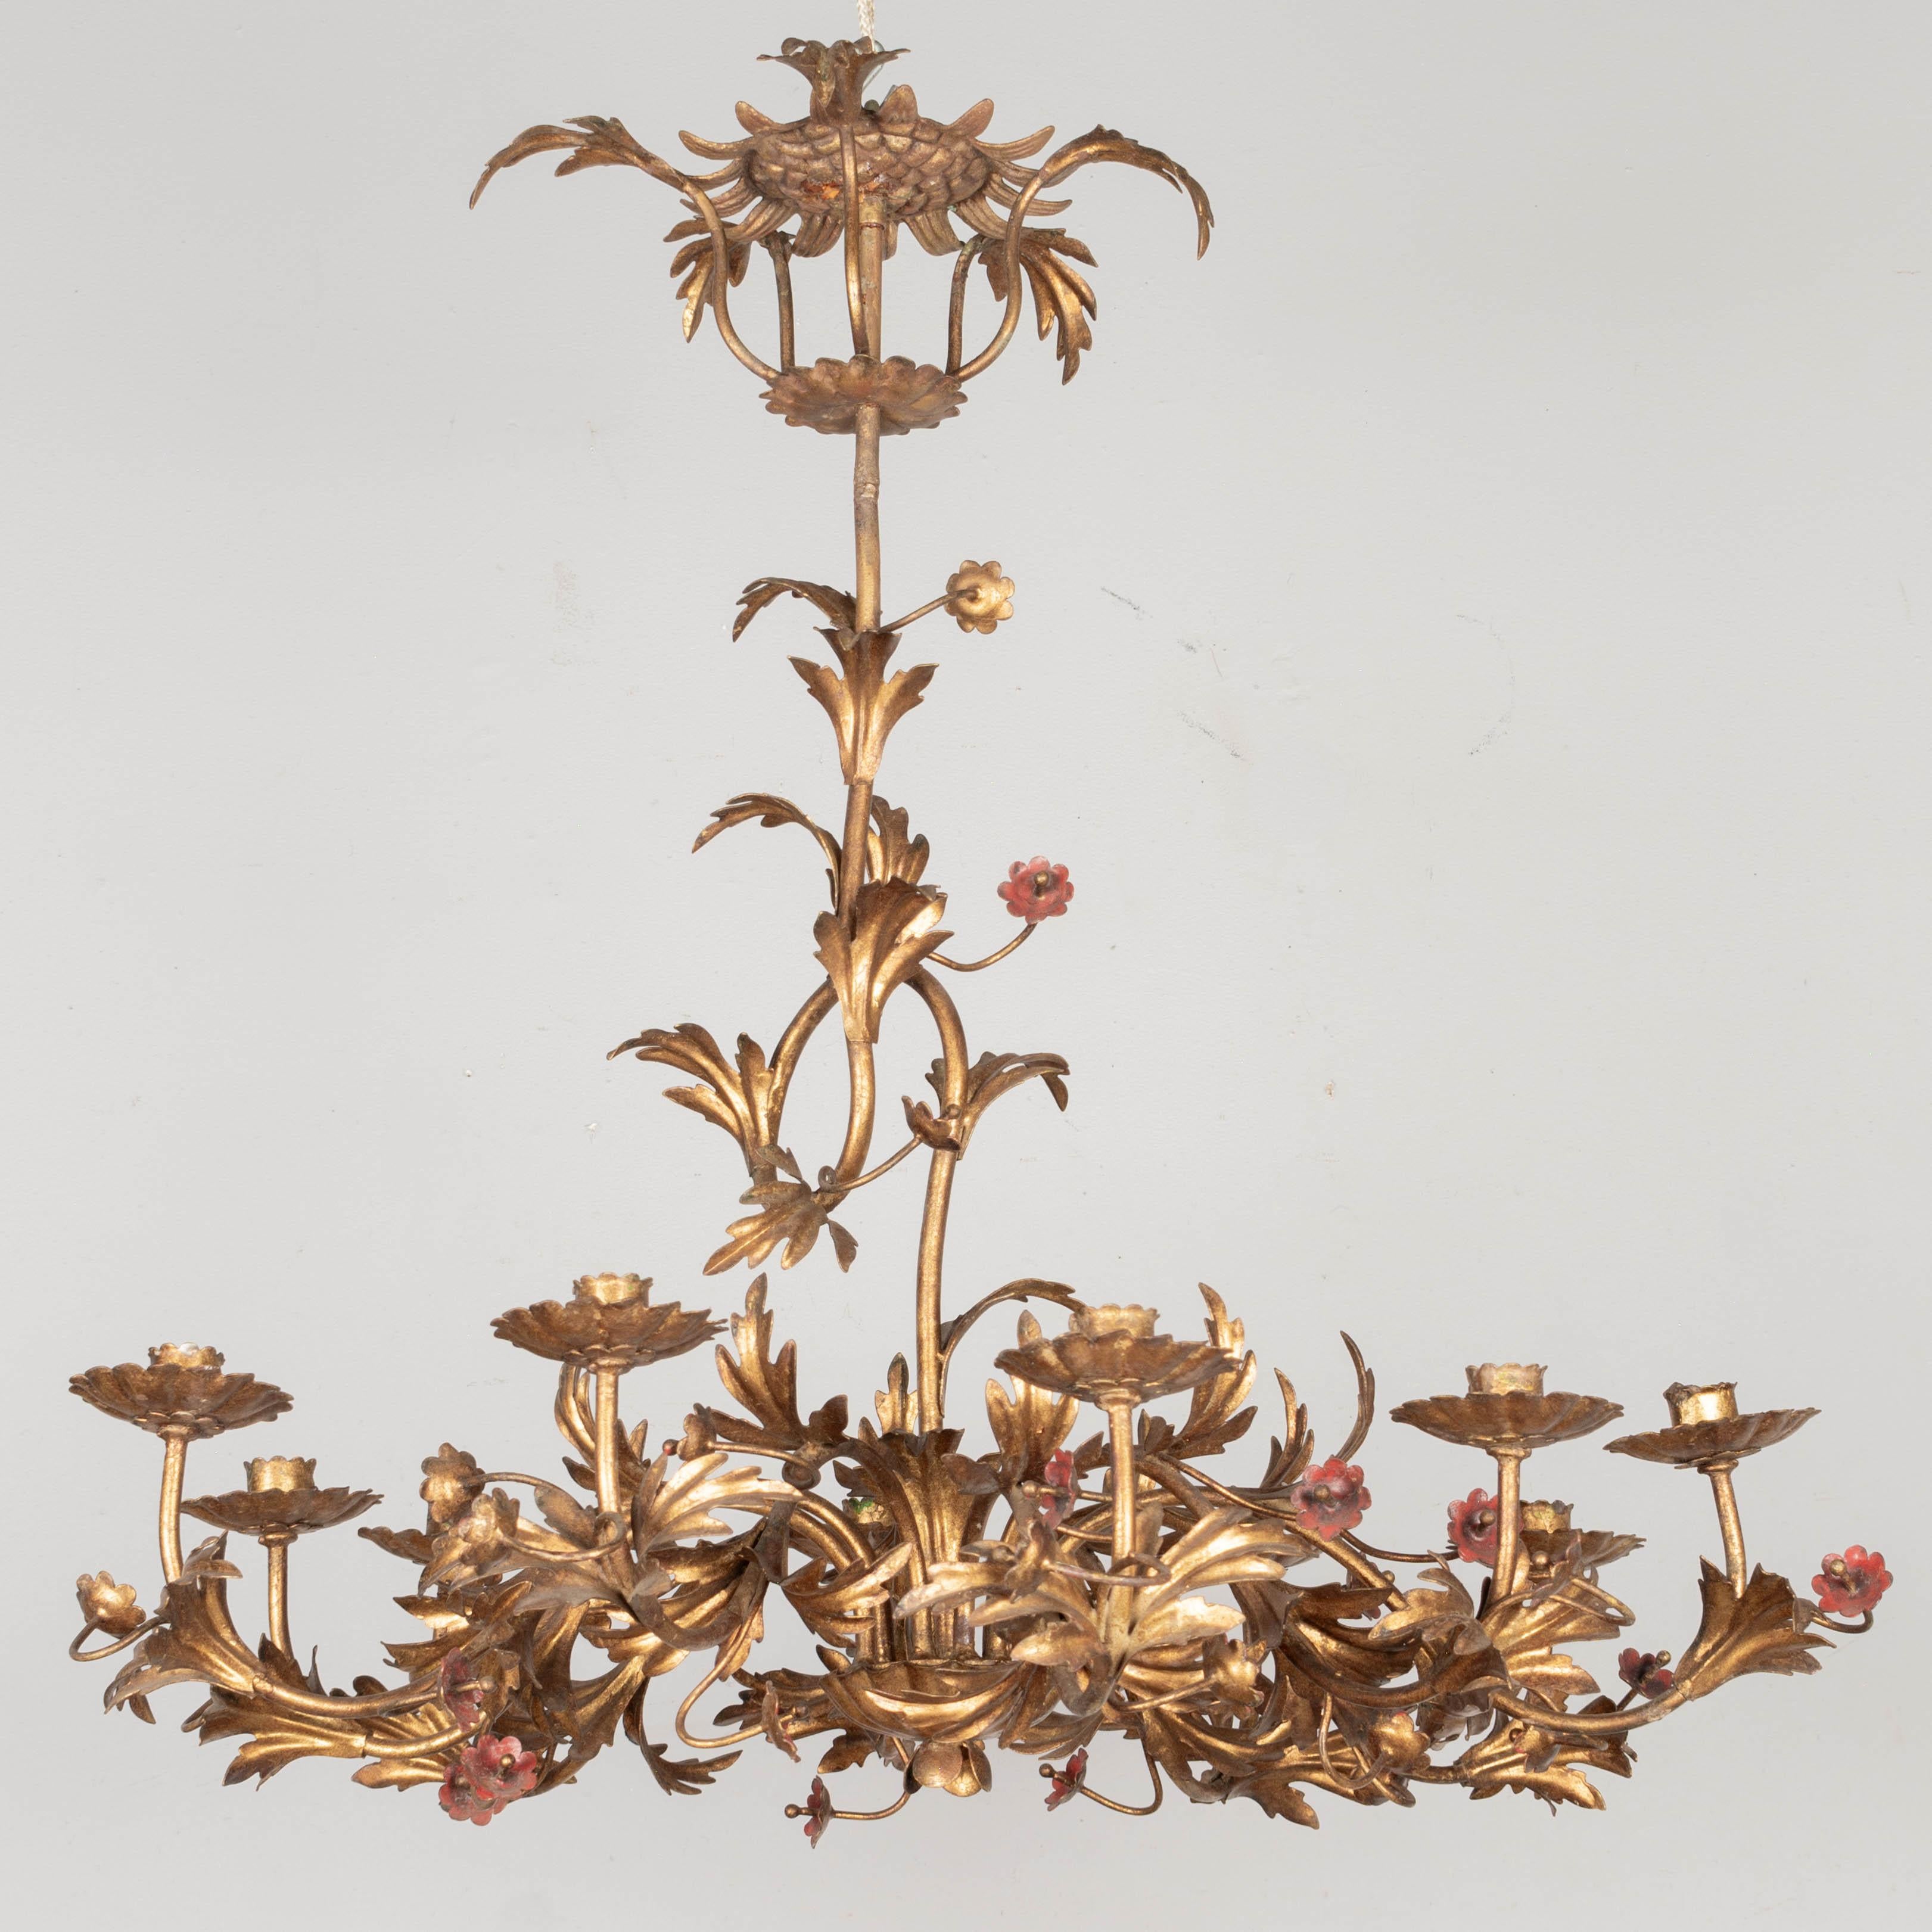 1950's Italian Gilt Tôle Candle Chandelier In Good Condition For Sale In Winter Park, FL